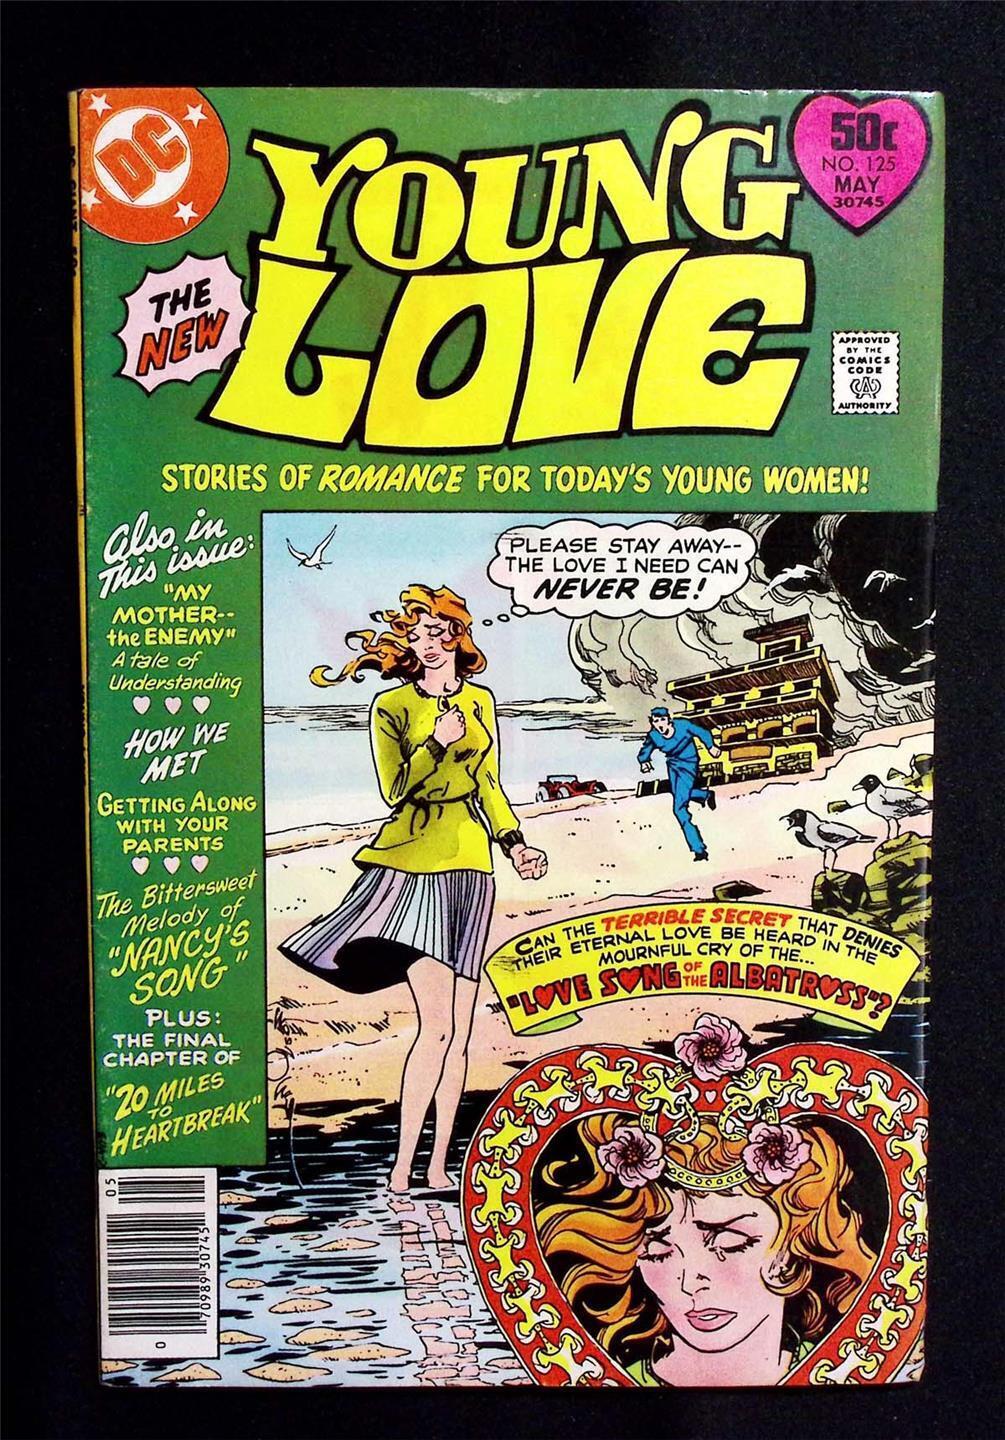 Young Love #125 May 1977-Alex Toth art-Nancy's Song-20 Miles to Heartbreak